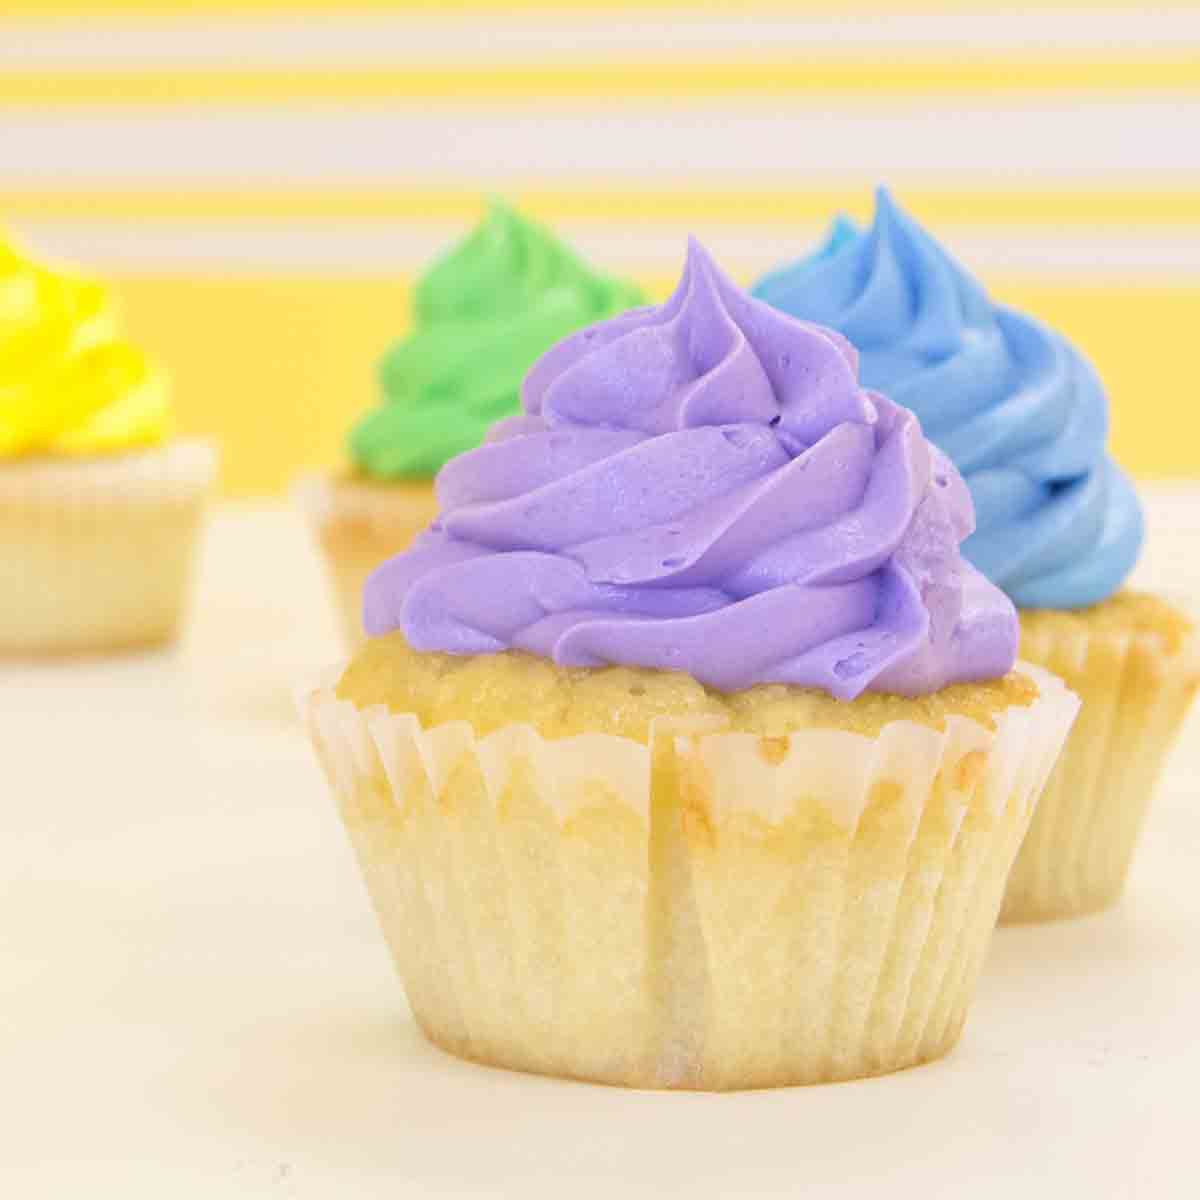 Cupcakes With Different Colours Of Frosting On Top